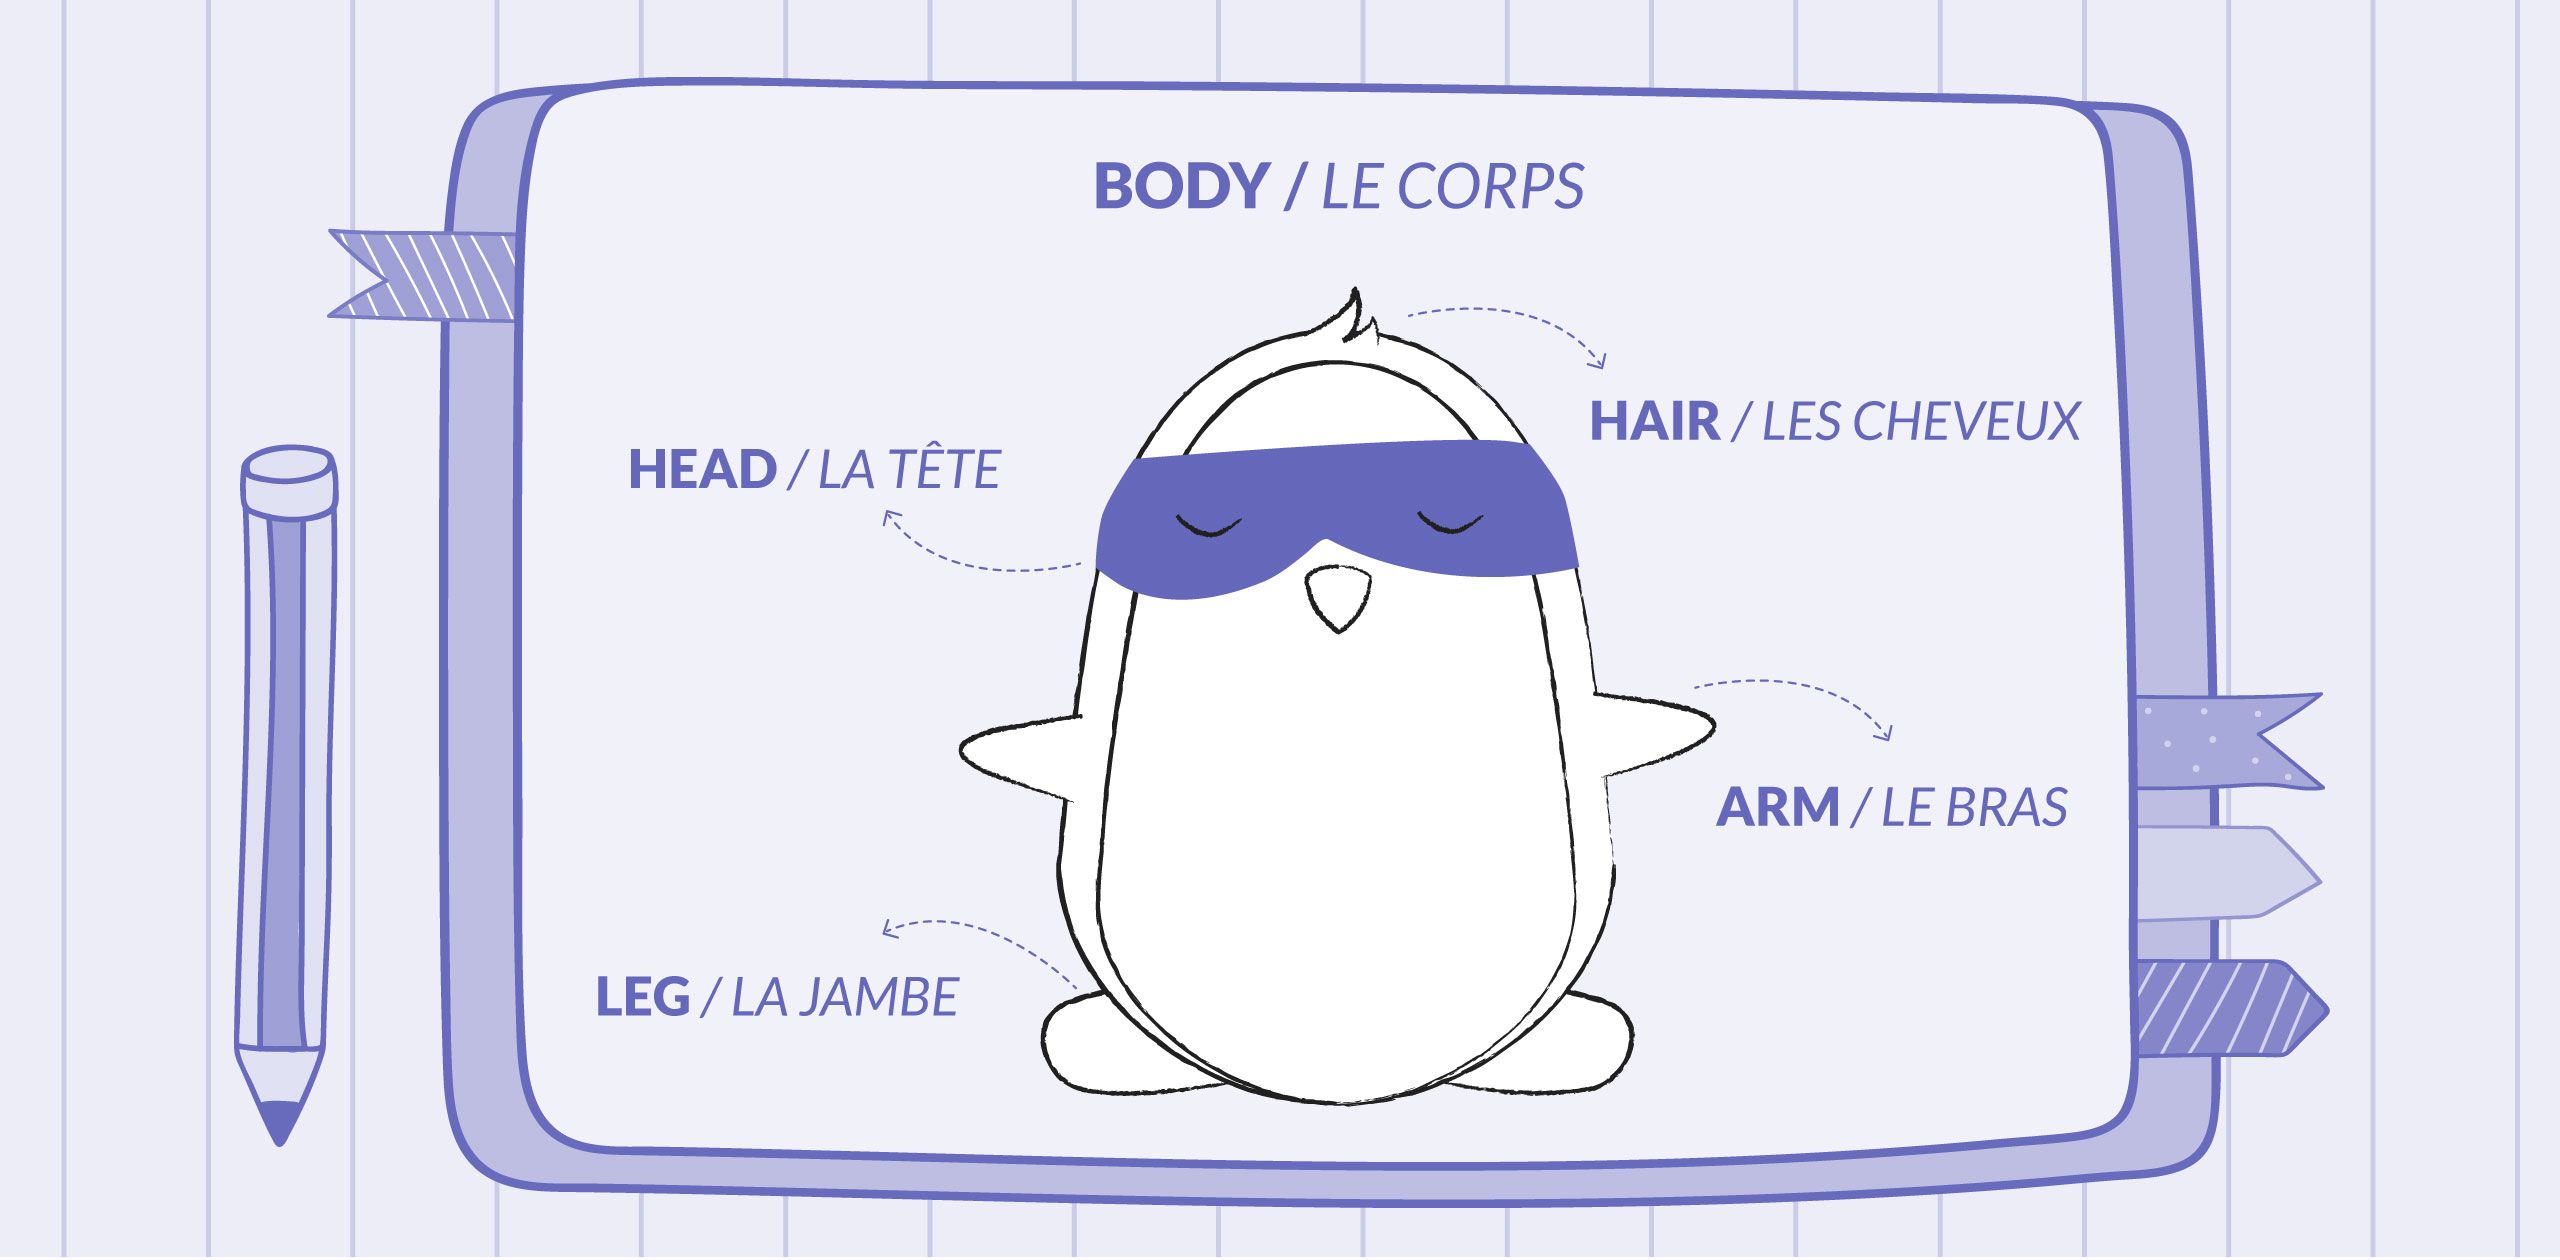 Body parts in French